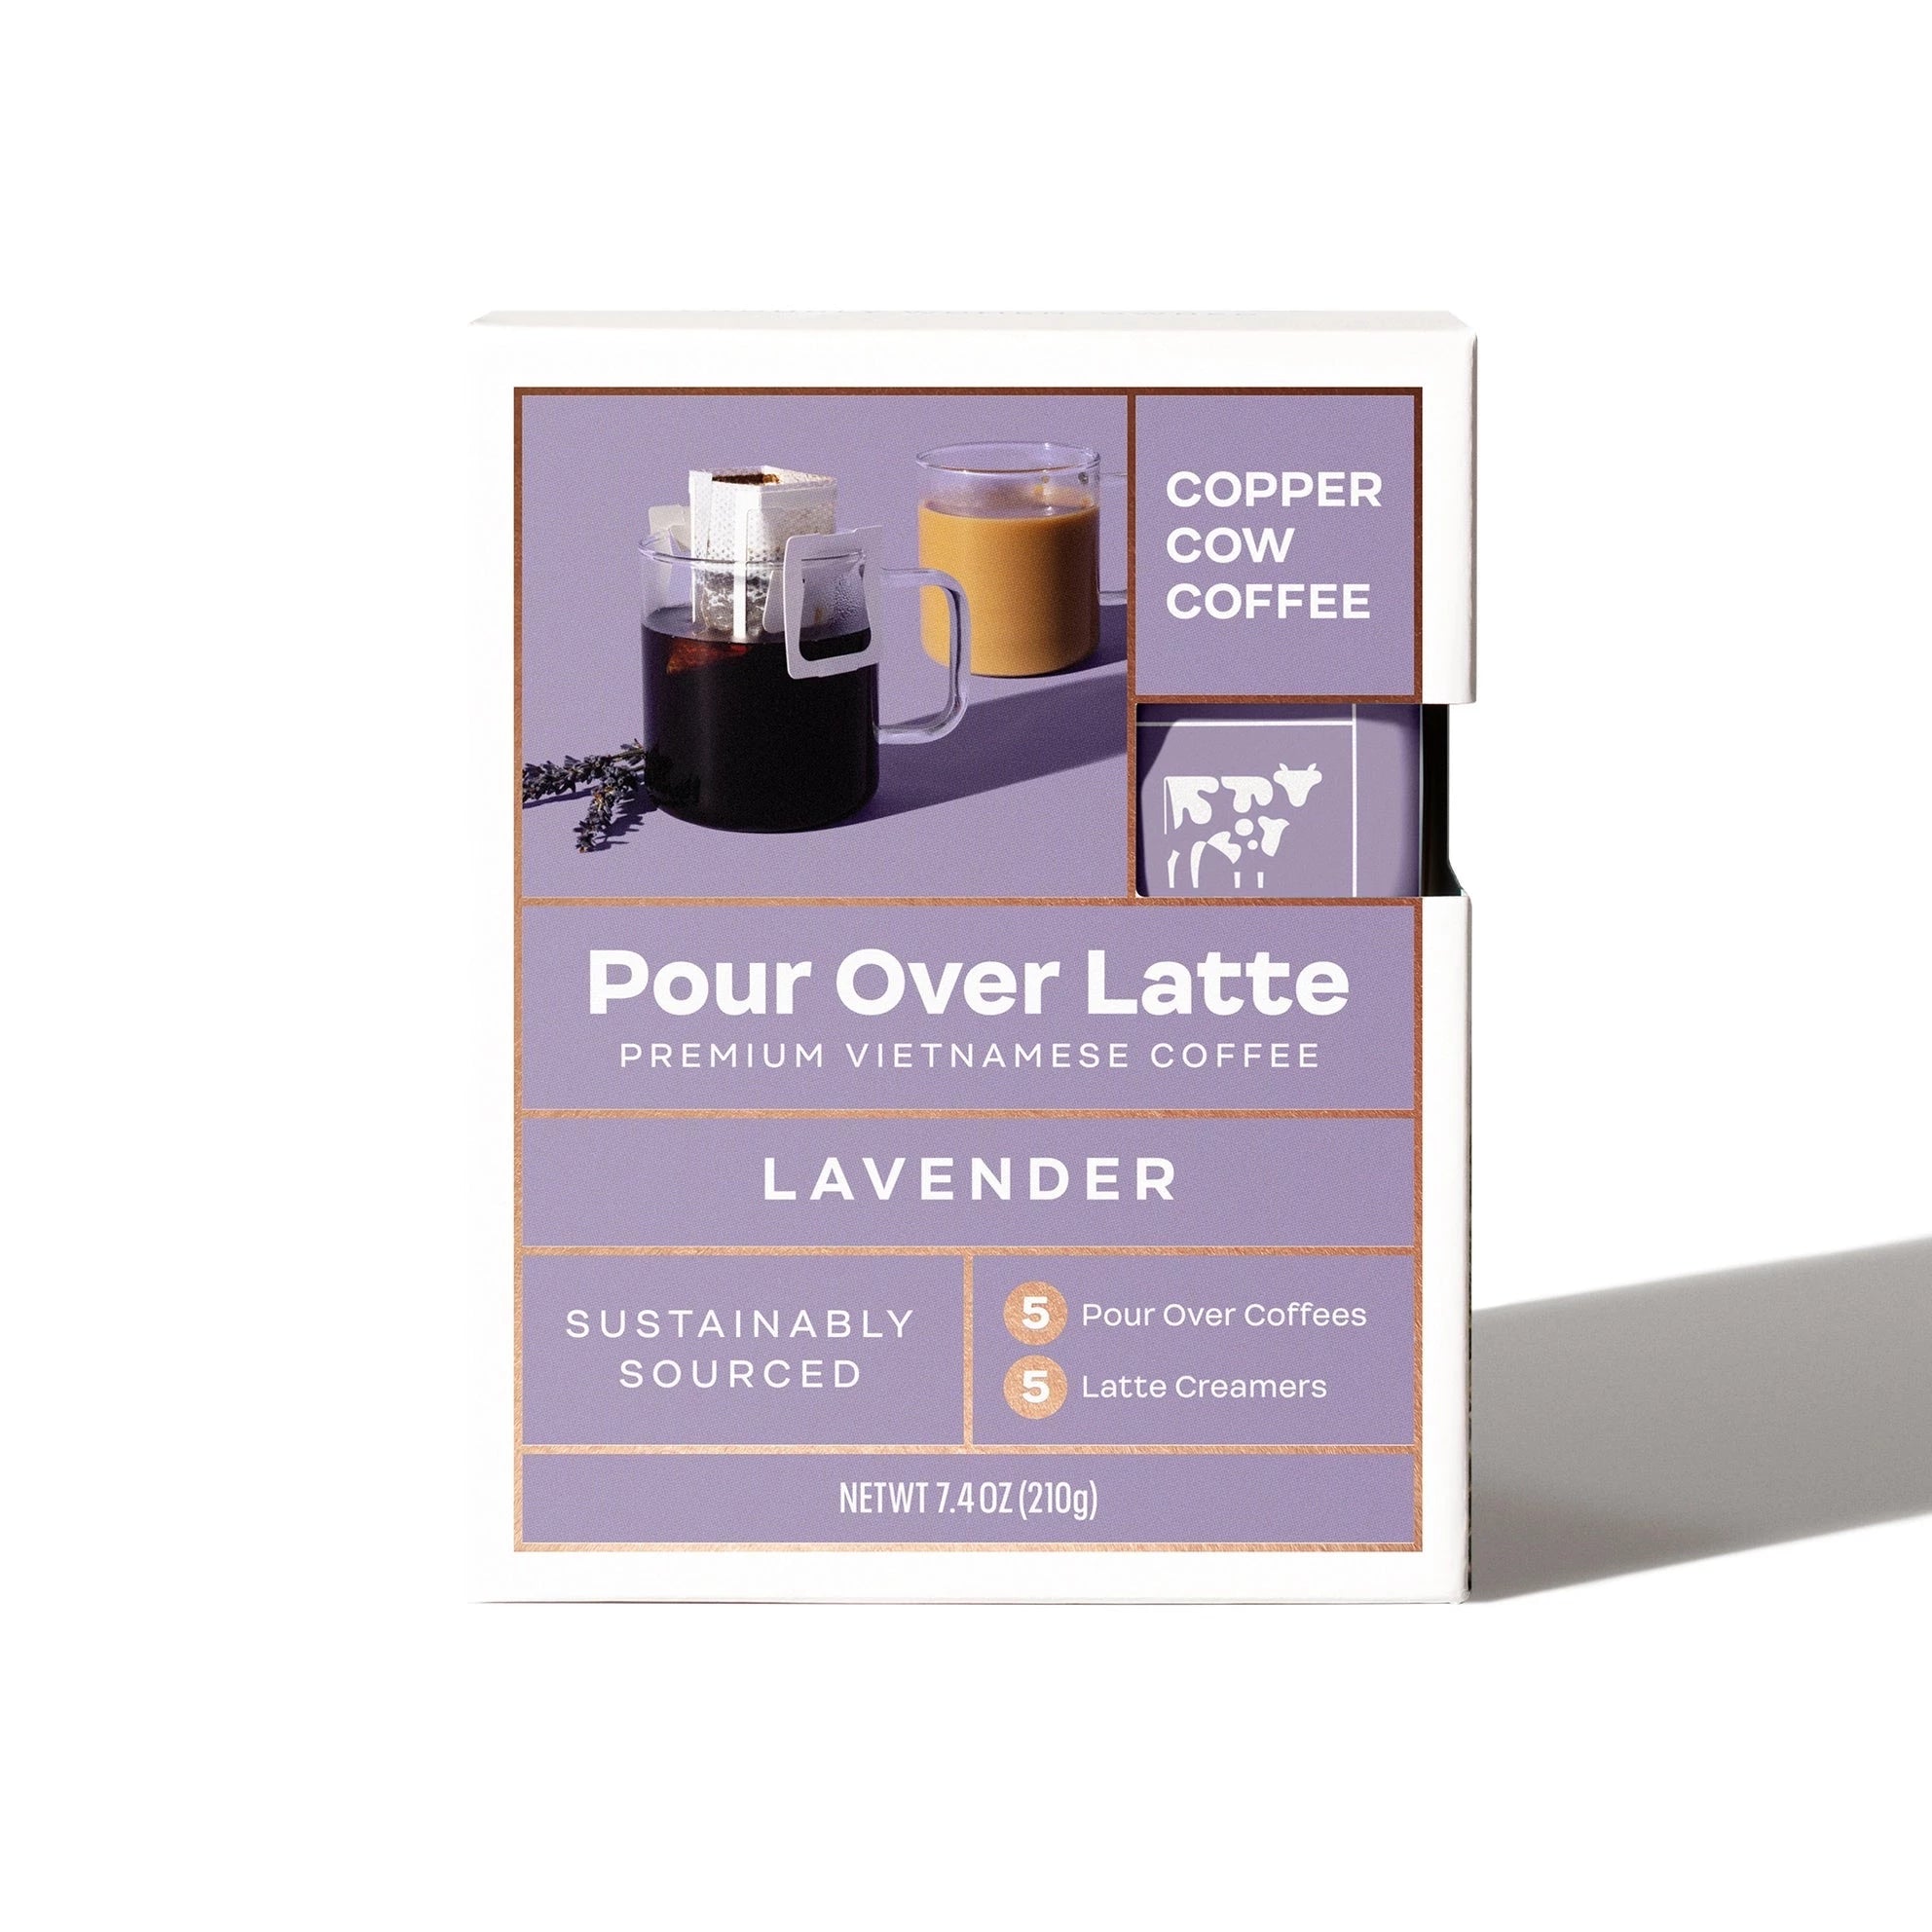 Purple box with white text. box shows lavender pour over coffee